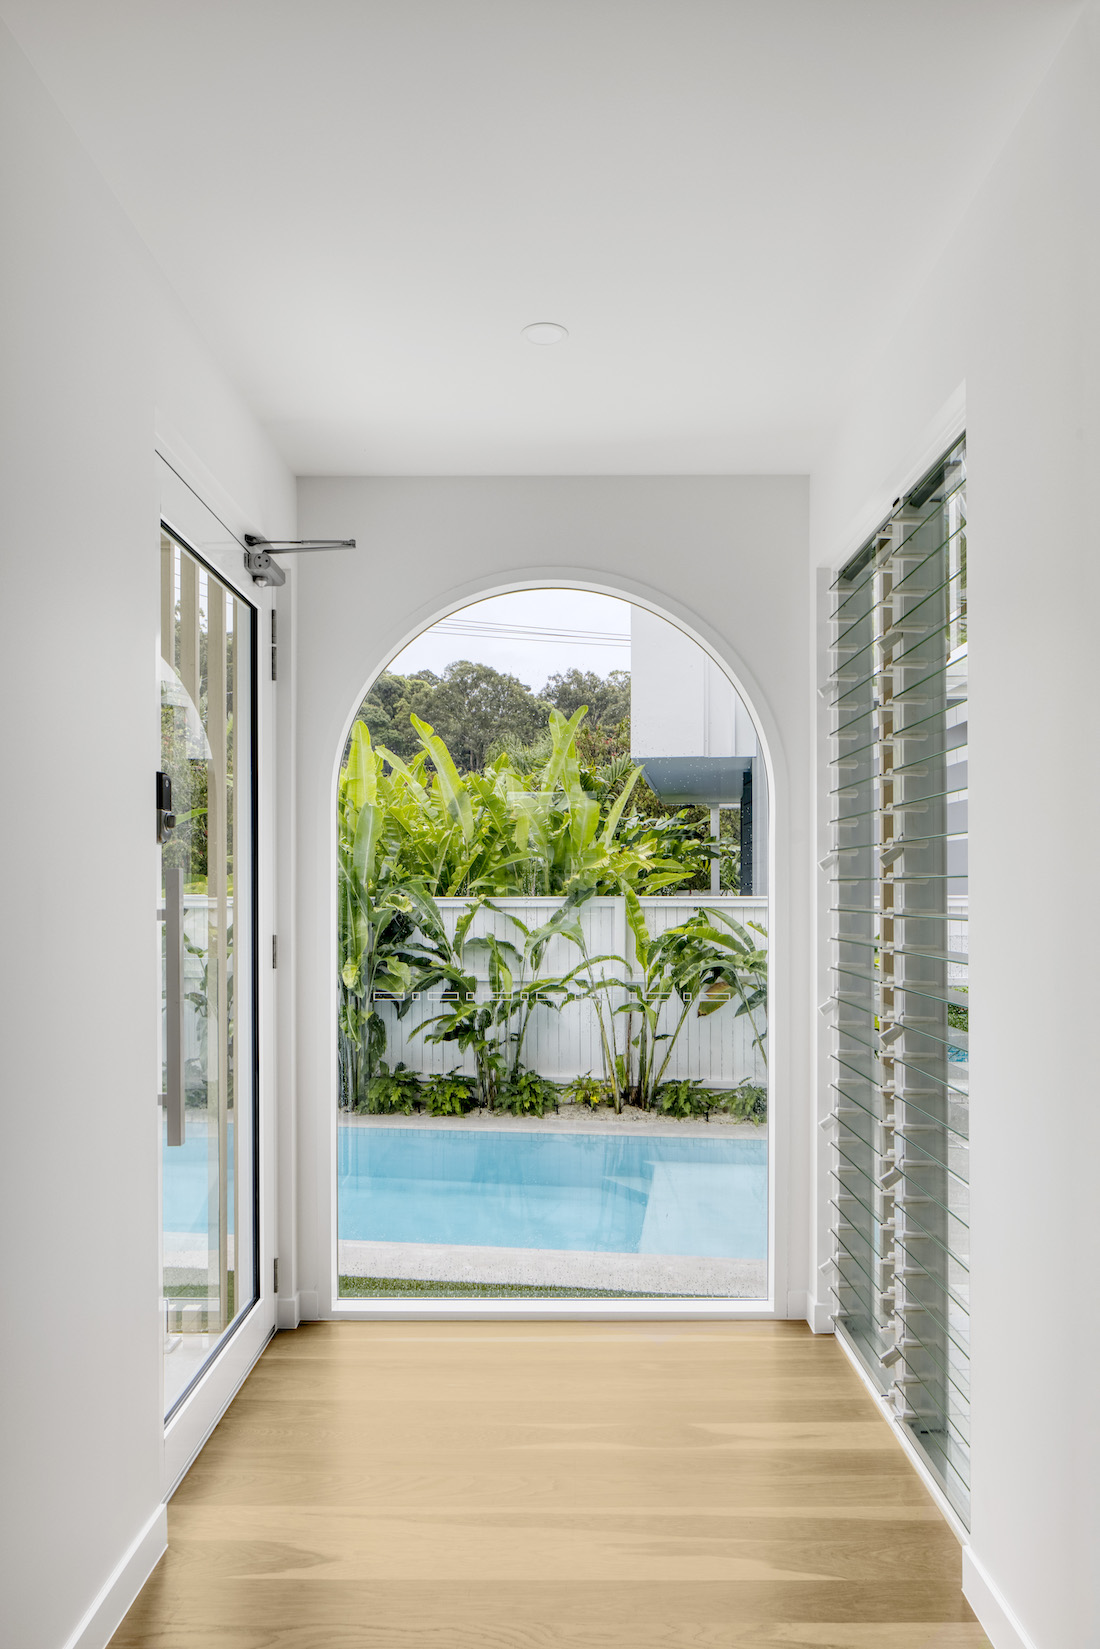 Arch doorway with view to pool at Tawarri house